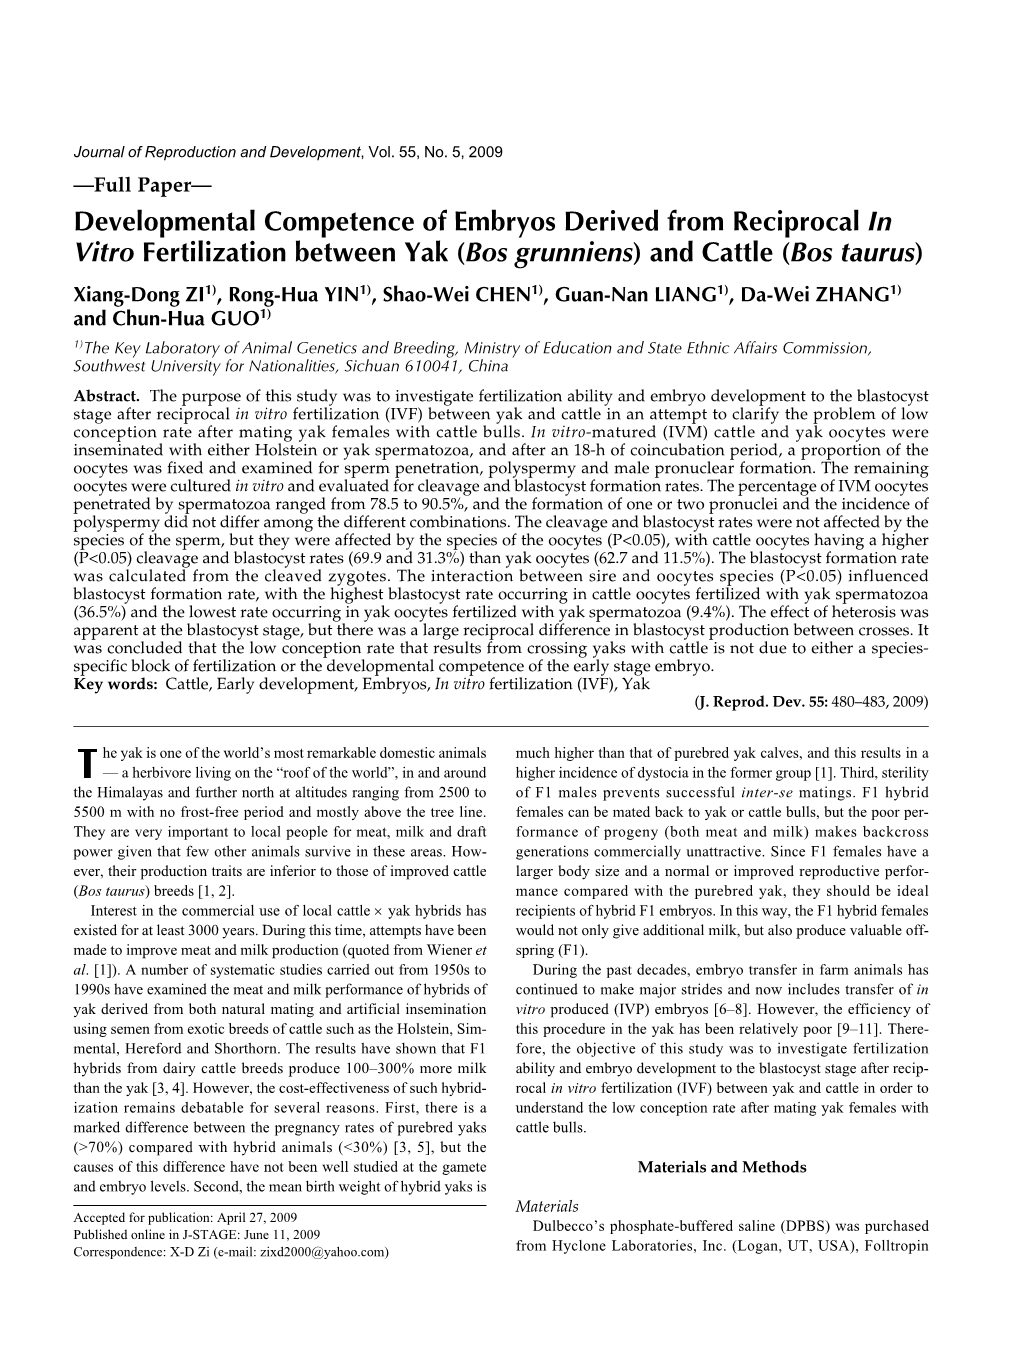 Developmental Competence of Embryos Derived From